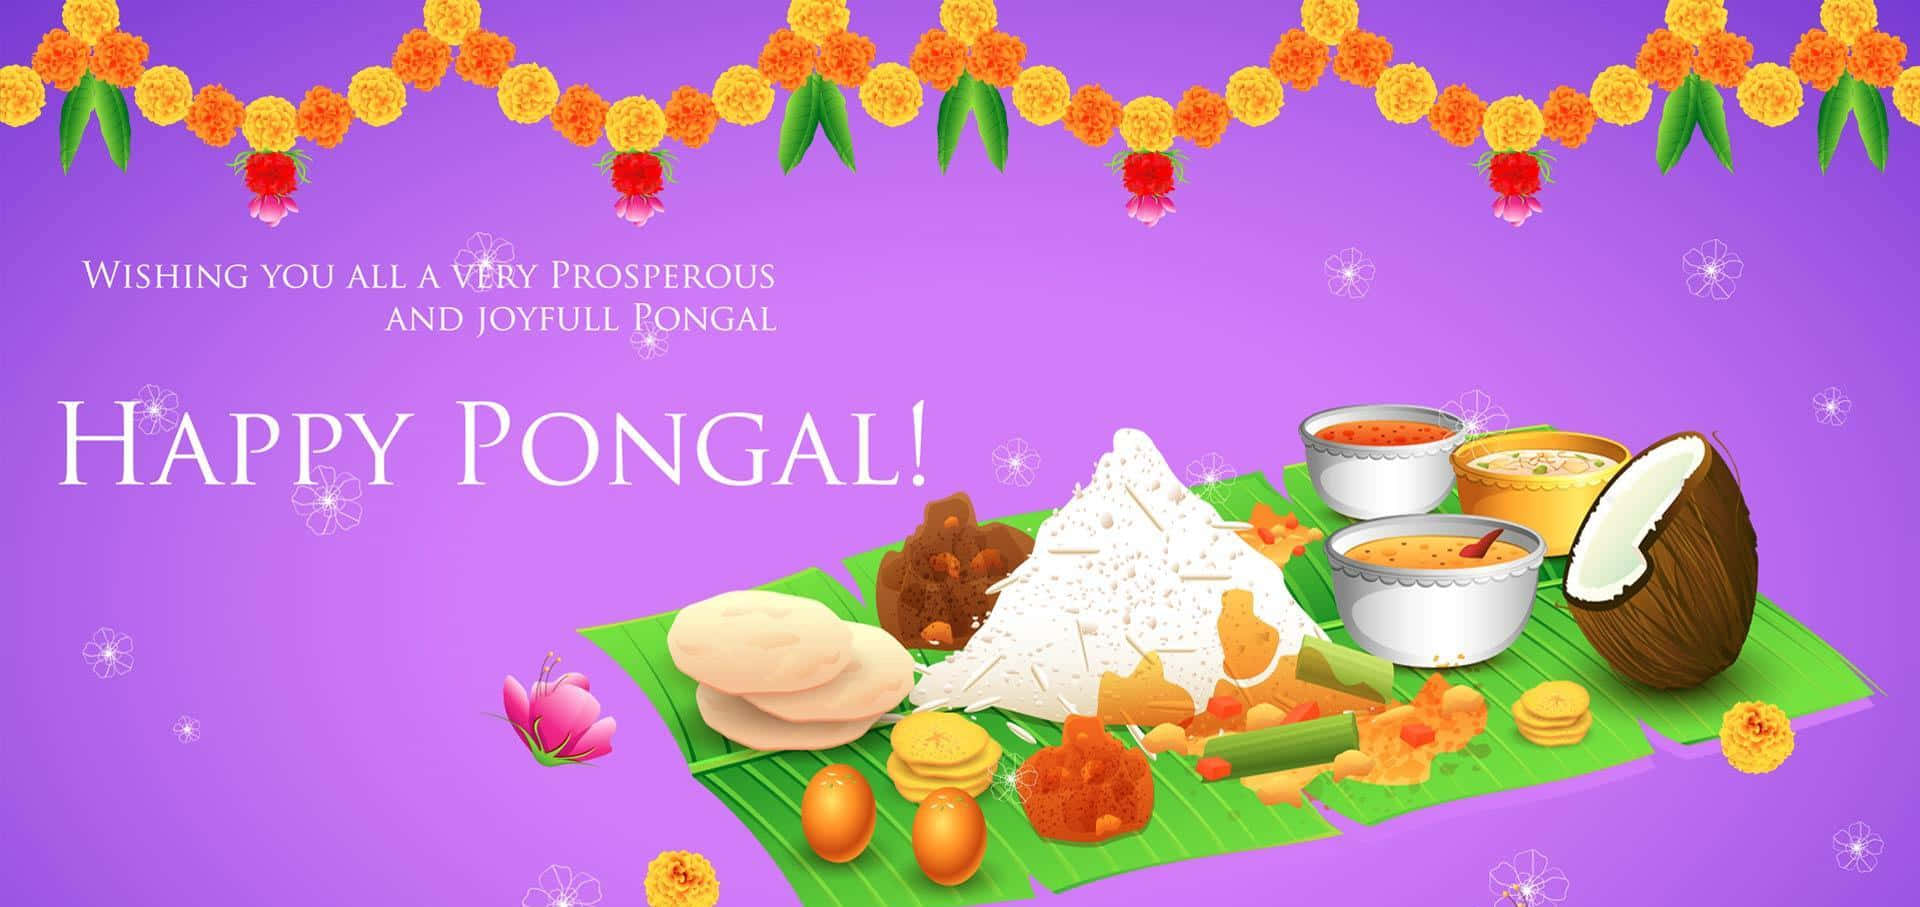 Celebrating Pongal with Traditional Decorations